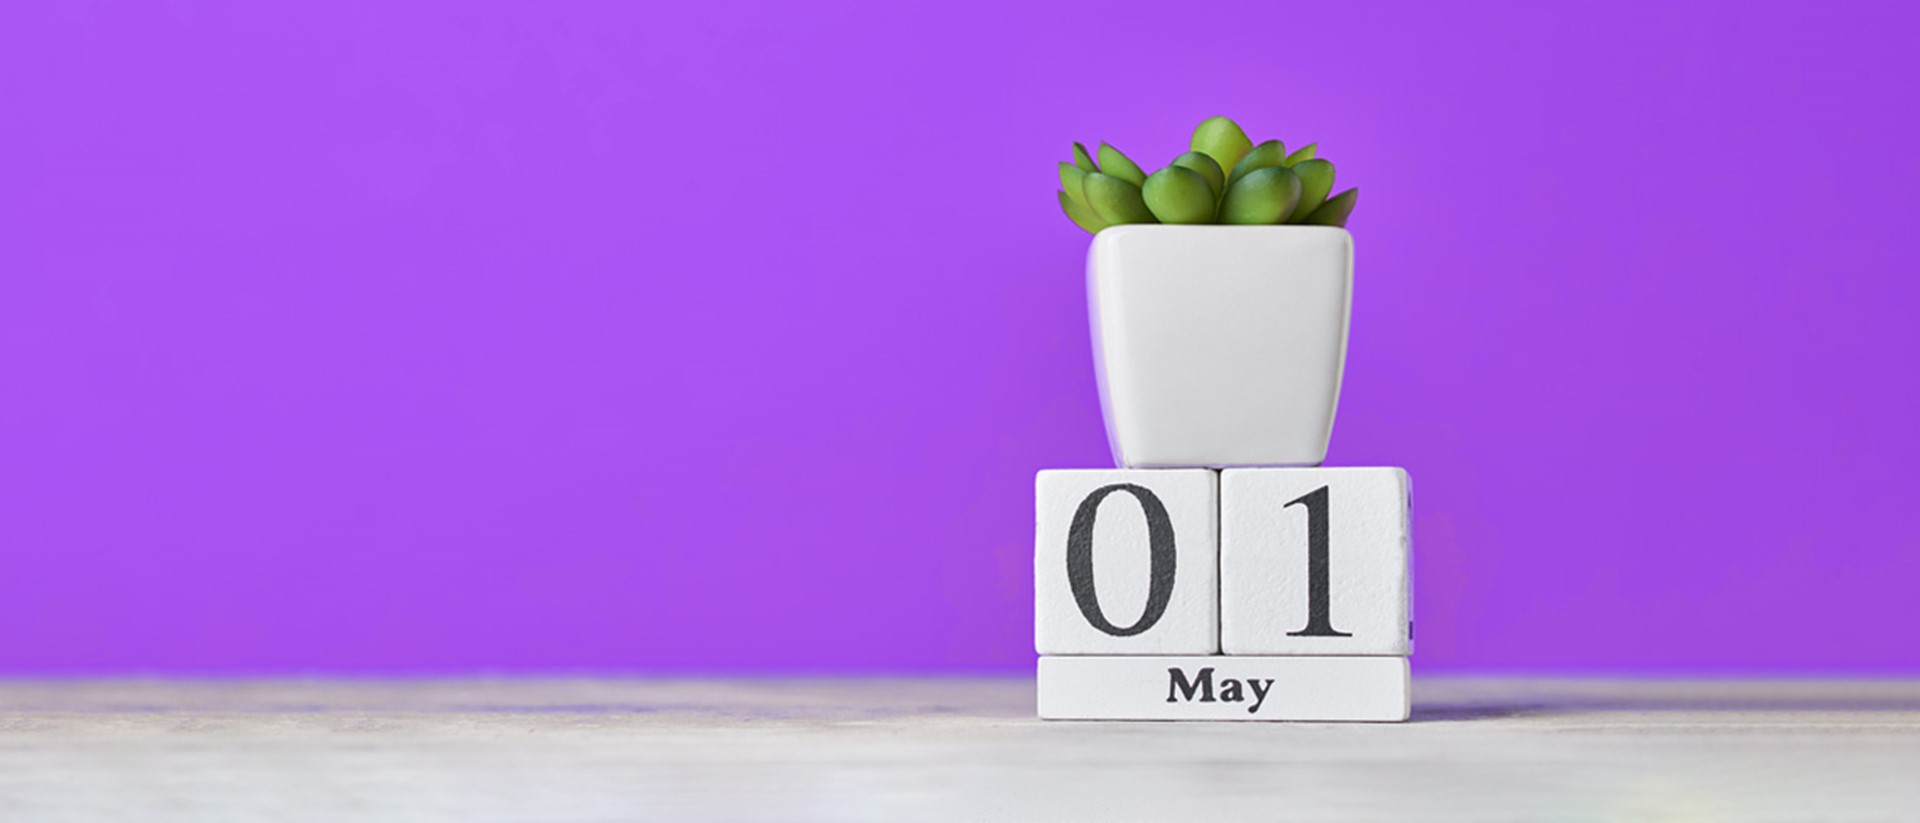 Image of a plant pot on top of tiles that show 01 May on a purple background